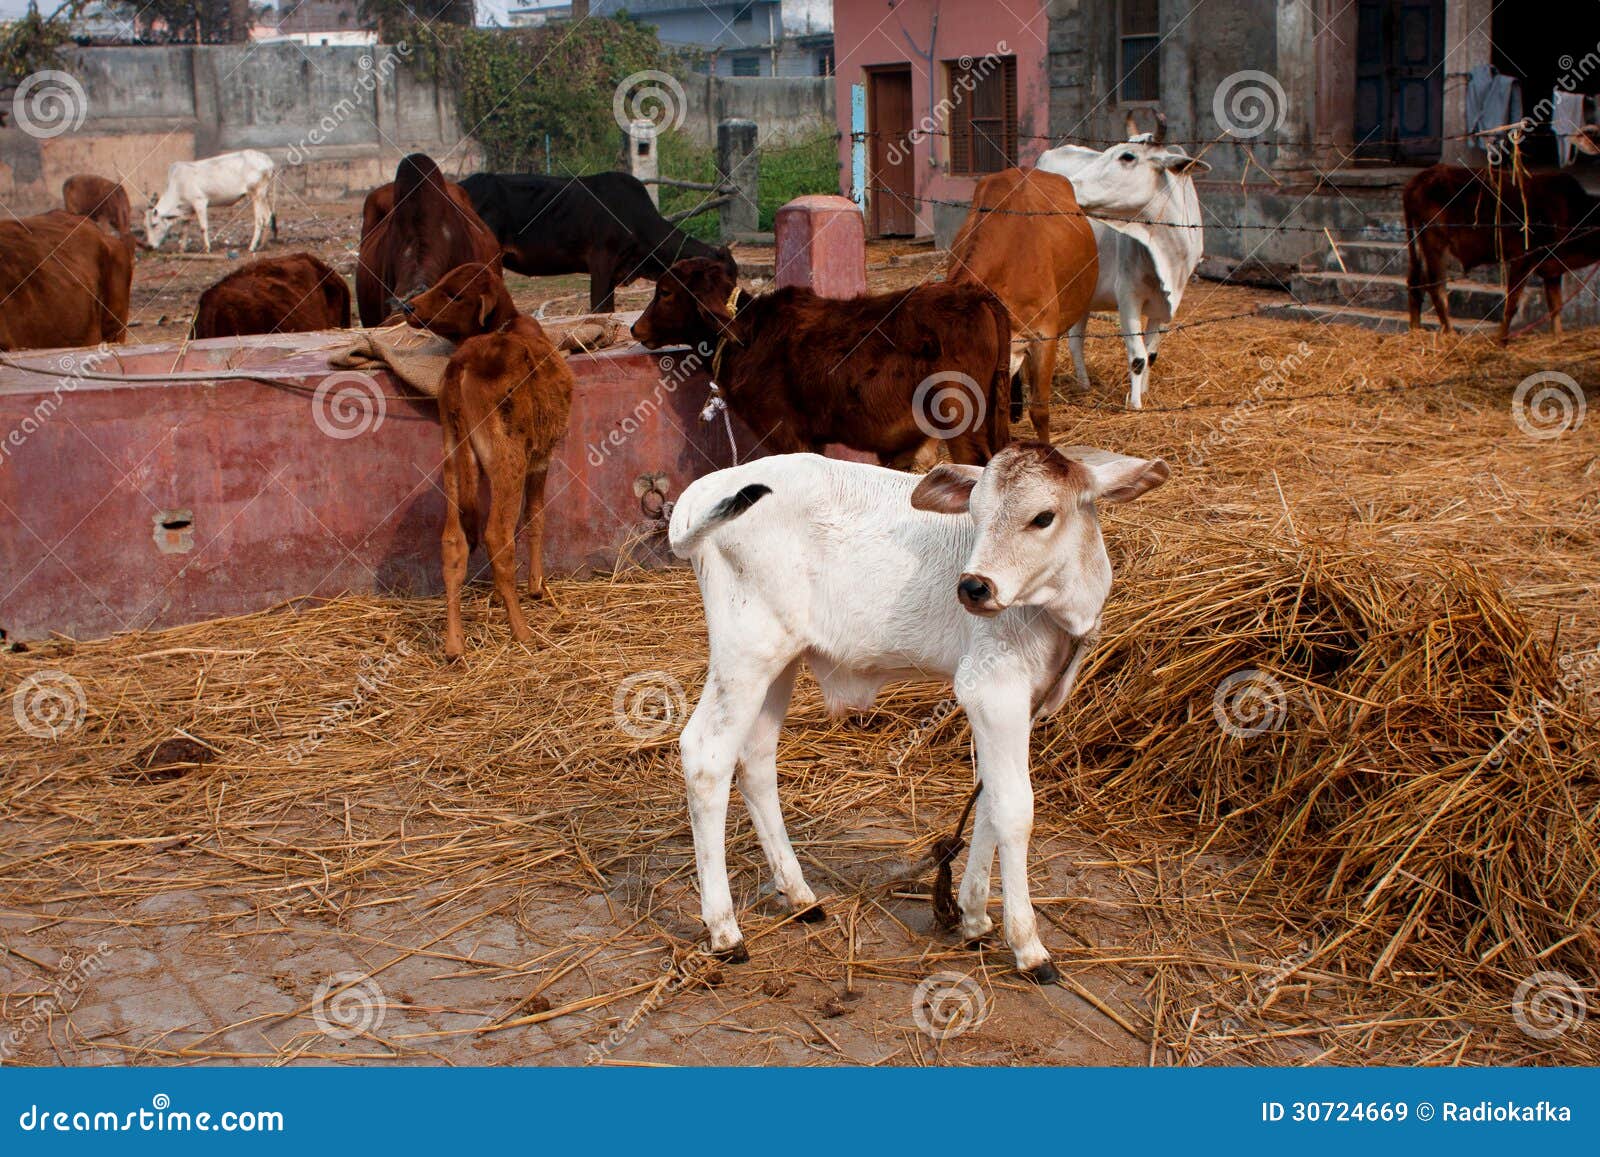 small calf and other animals in a rustic barn royalty free